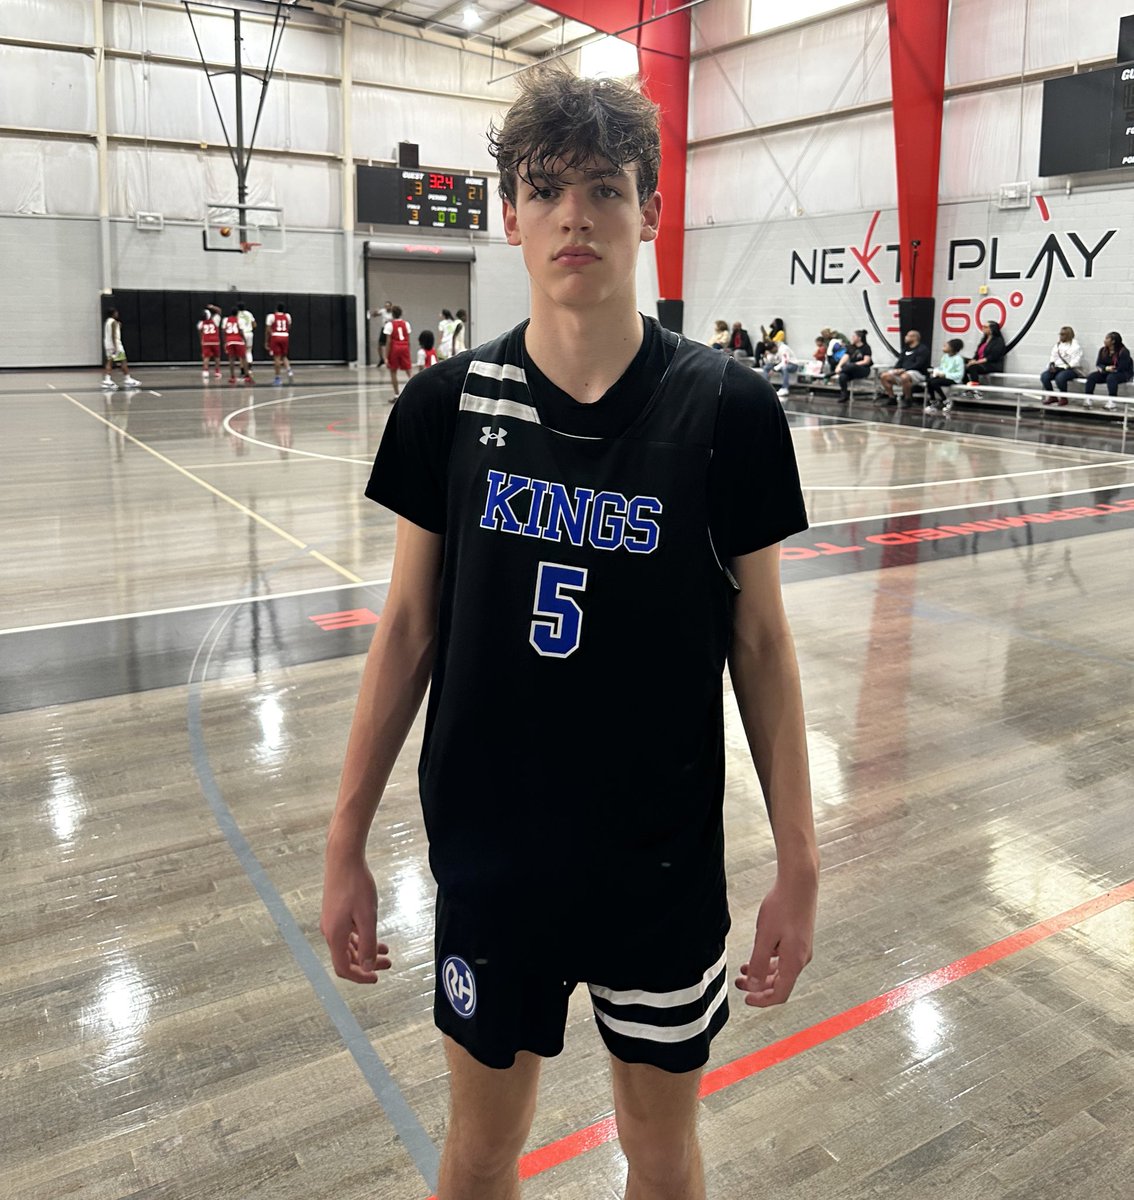 2026 F Jack Rinehart out of John’s Creek HS emerges as standout for Reach Higher Kings. Rinehart has great size at 6’6 and displayed the ability to create offense off the dribble with a nice skillset to match. He also showed he can play above the rim and can defend 1-5.